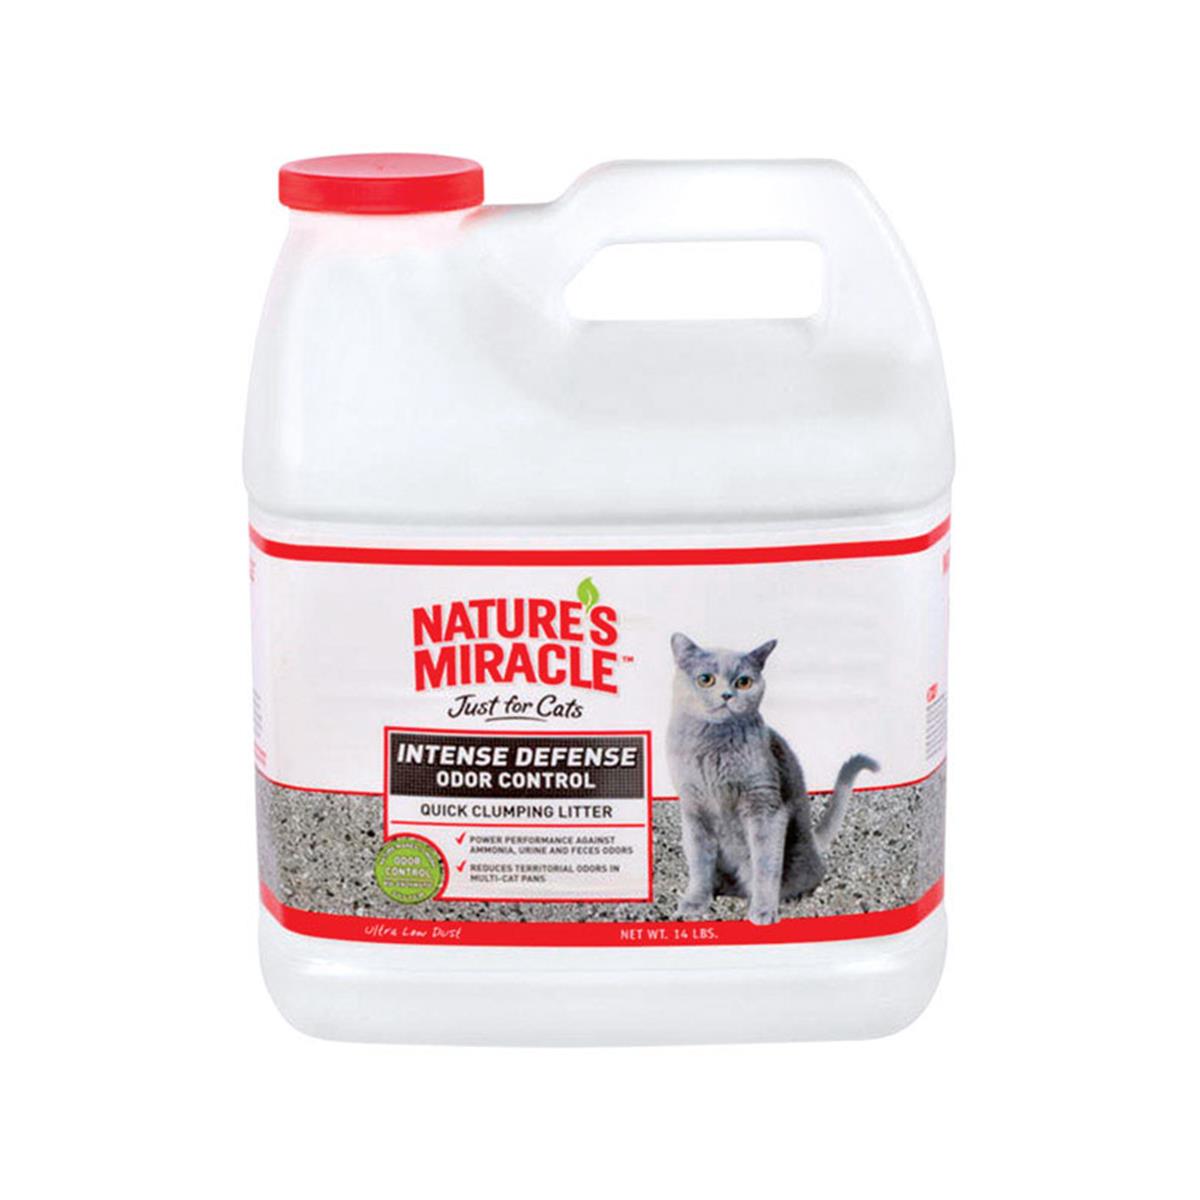 Picture of Natures Miracle 8415887 14 lbs No Scent Cat Litter